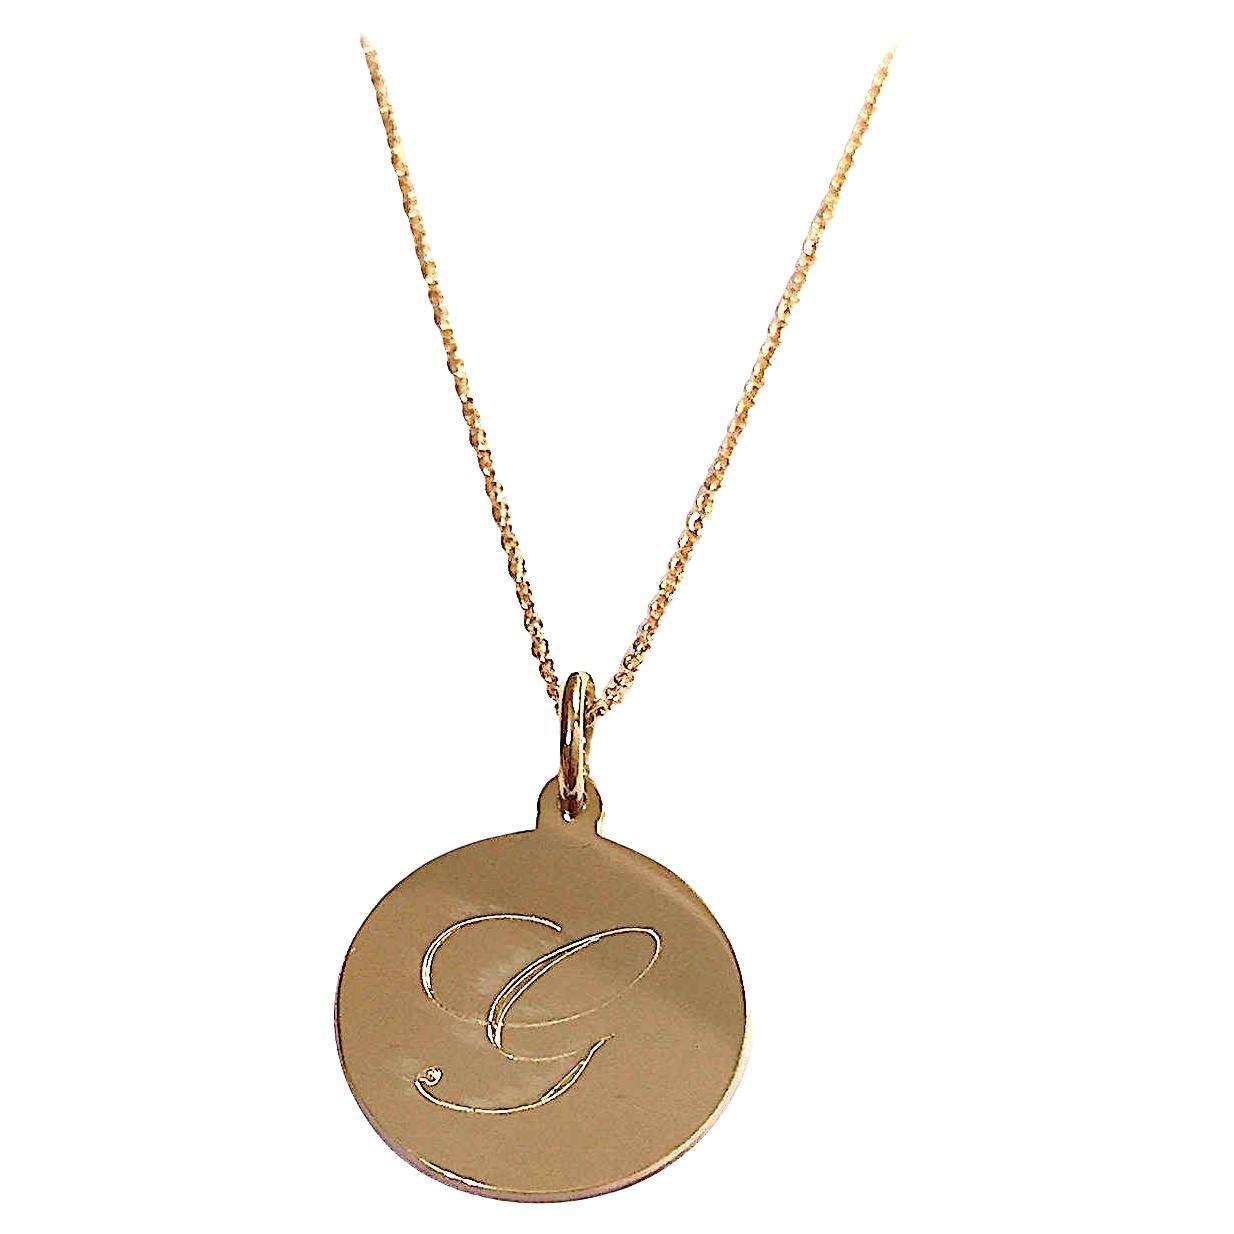 Beautiful Personalized Engraved Gold Circle Pendant and Chain